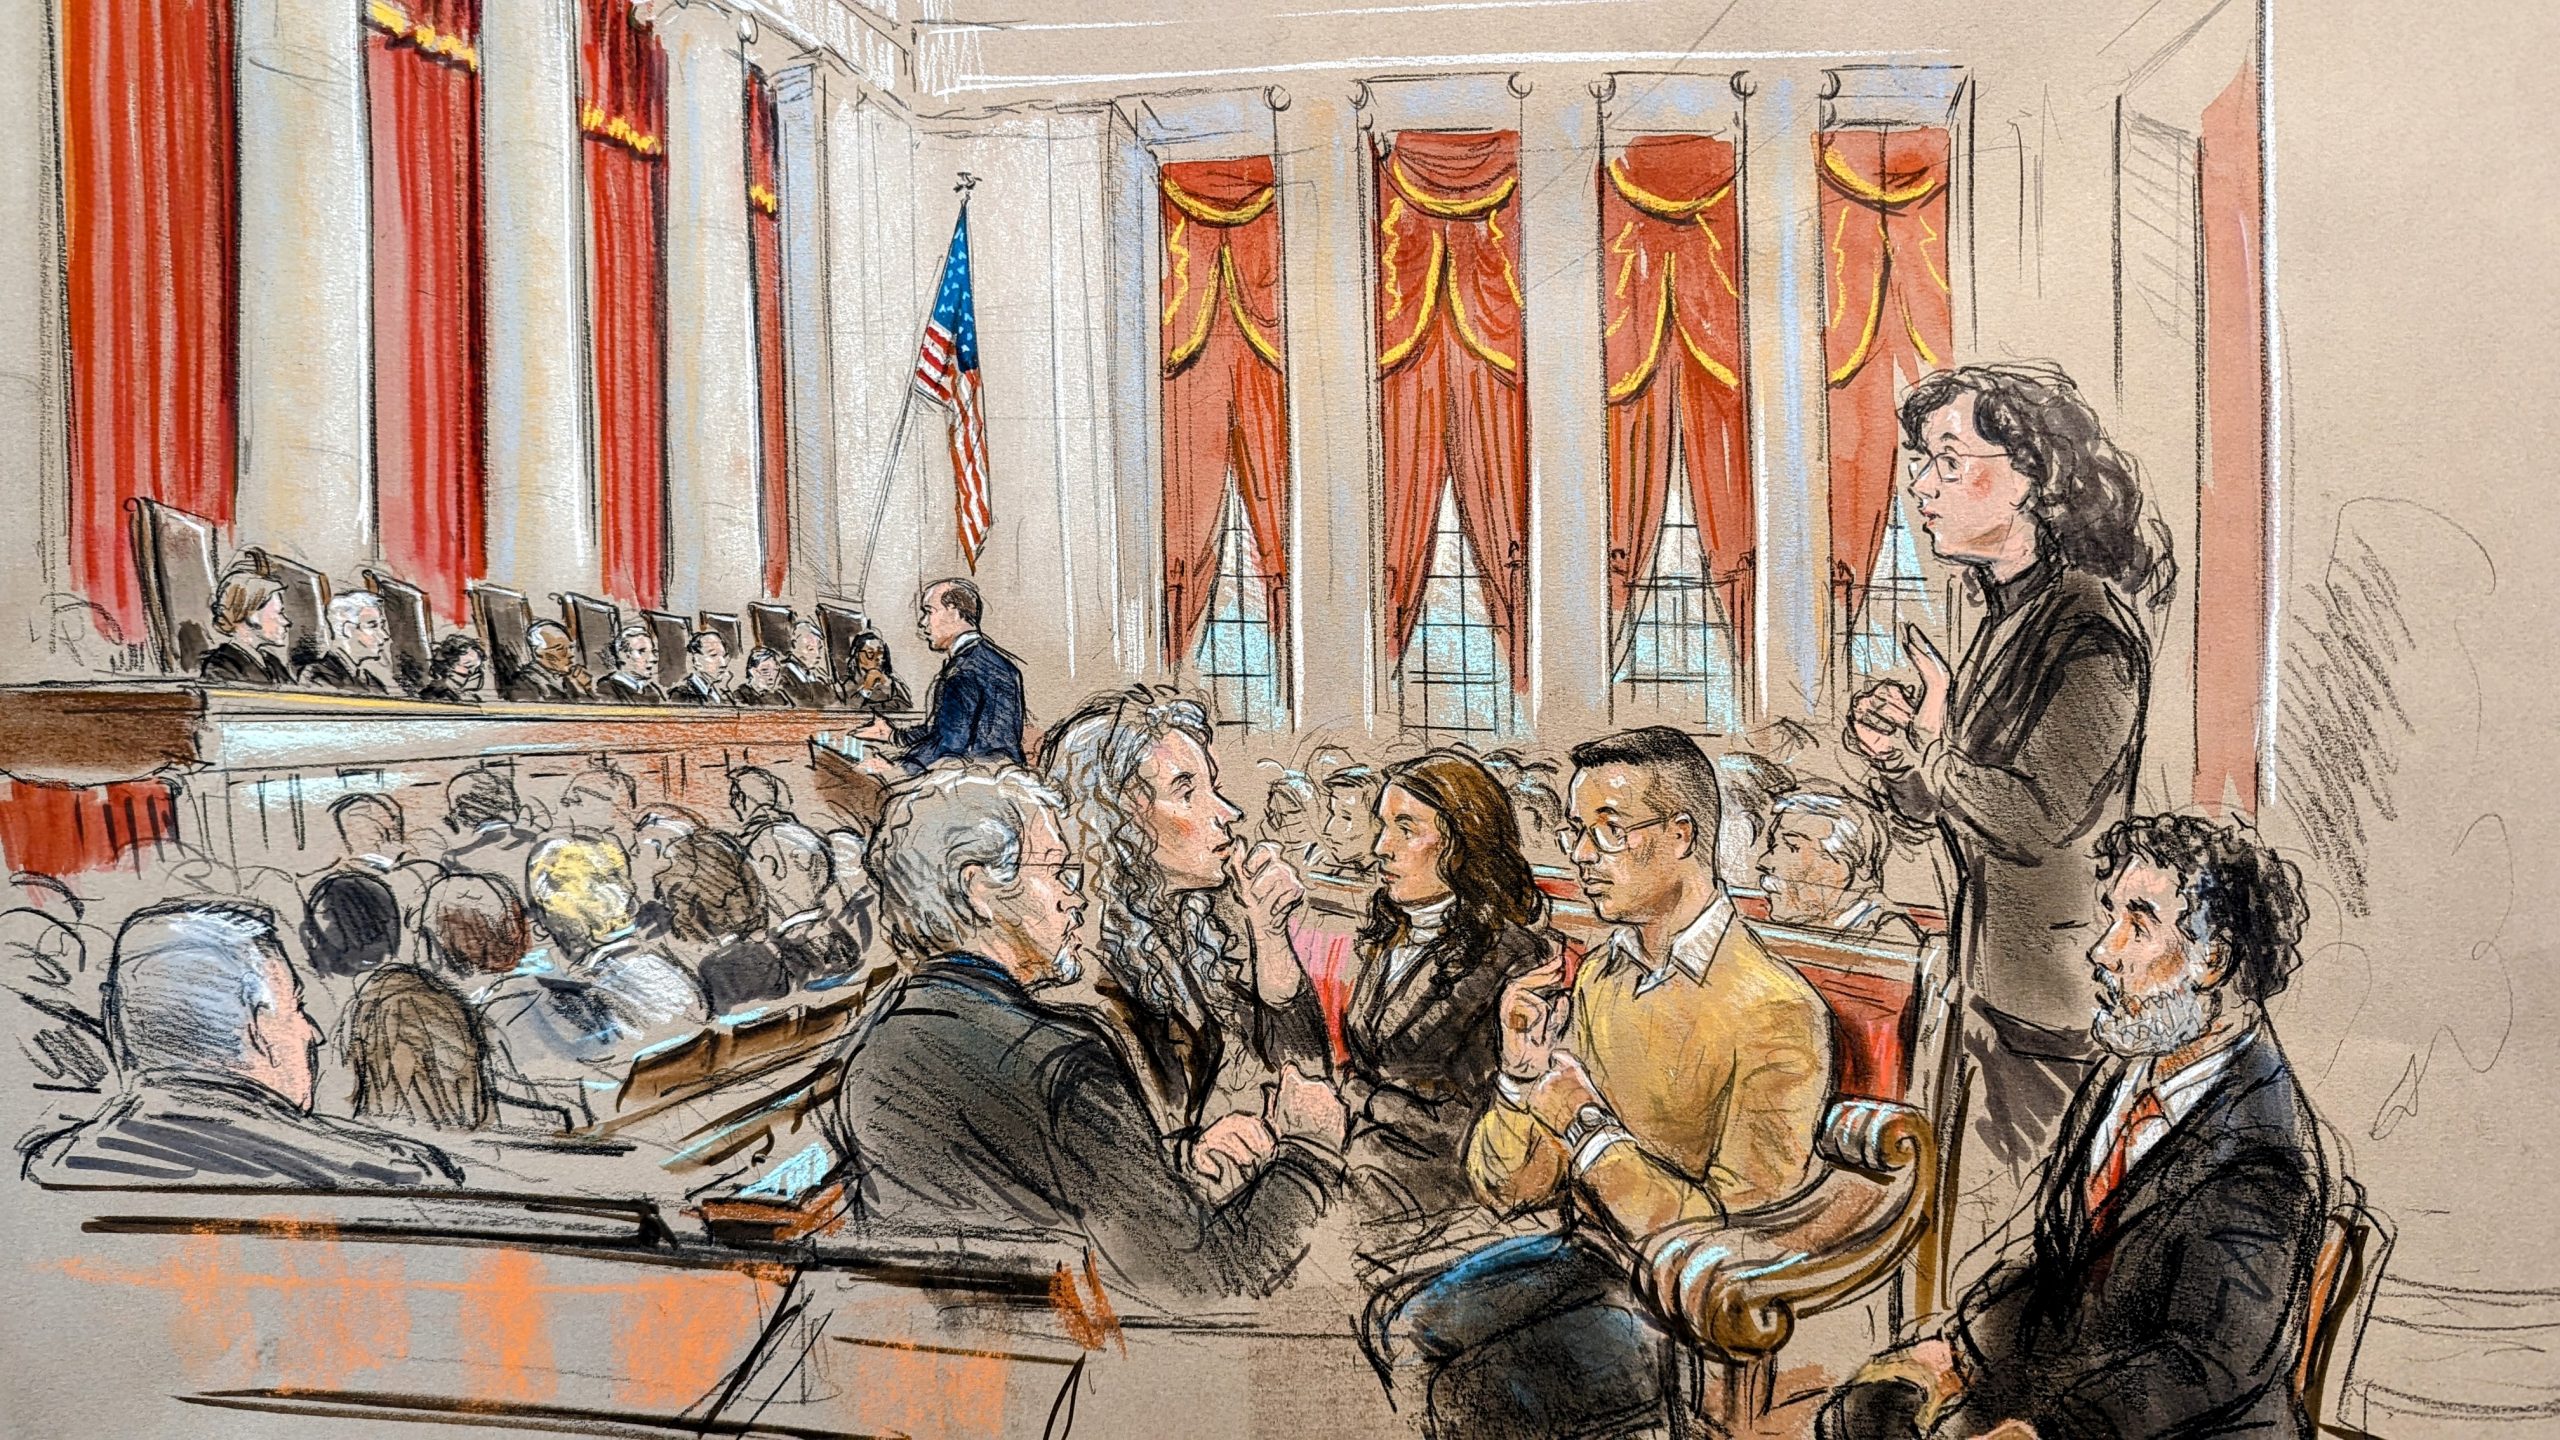 Sketch of the courtroom focusing on Miguel Perez, petitioner, and the four sign-language interpreters that surround him.